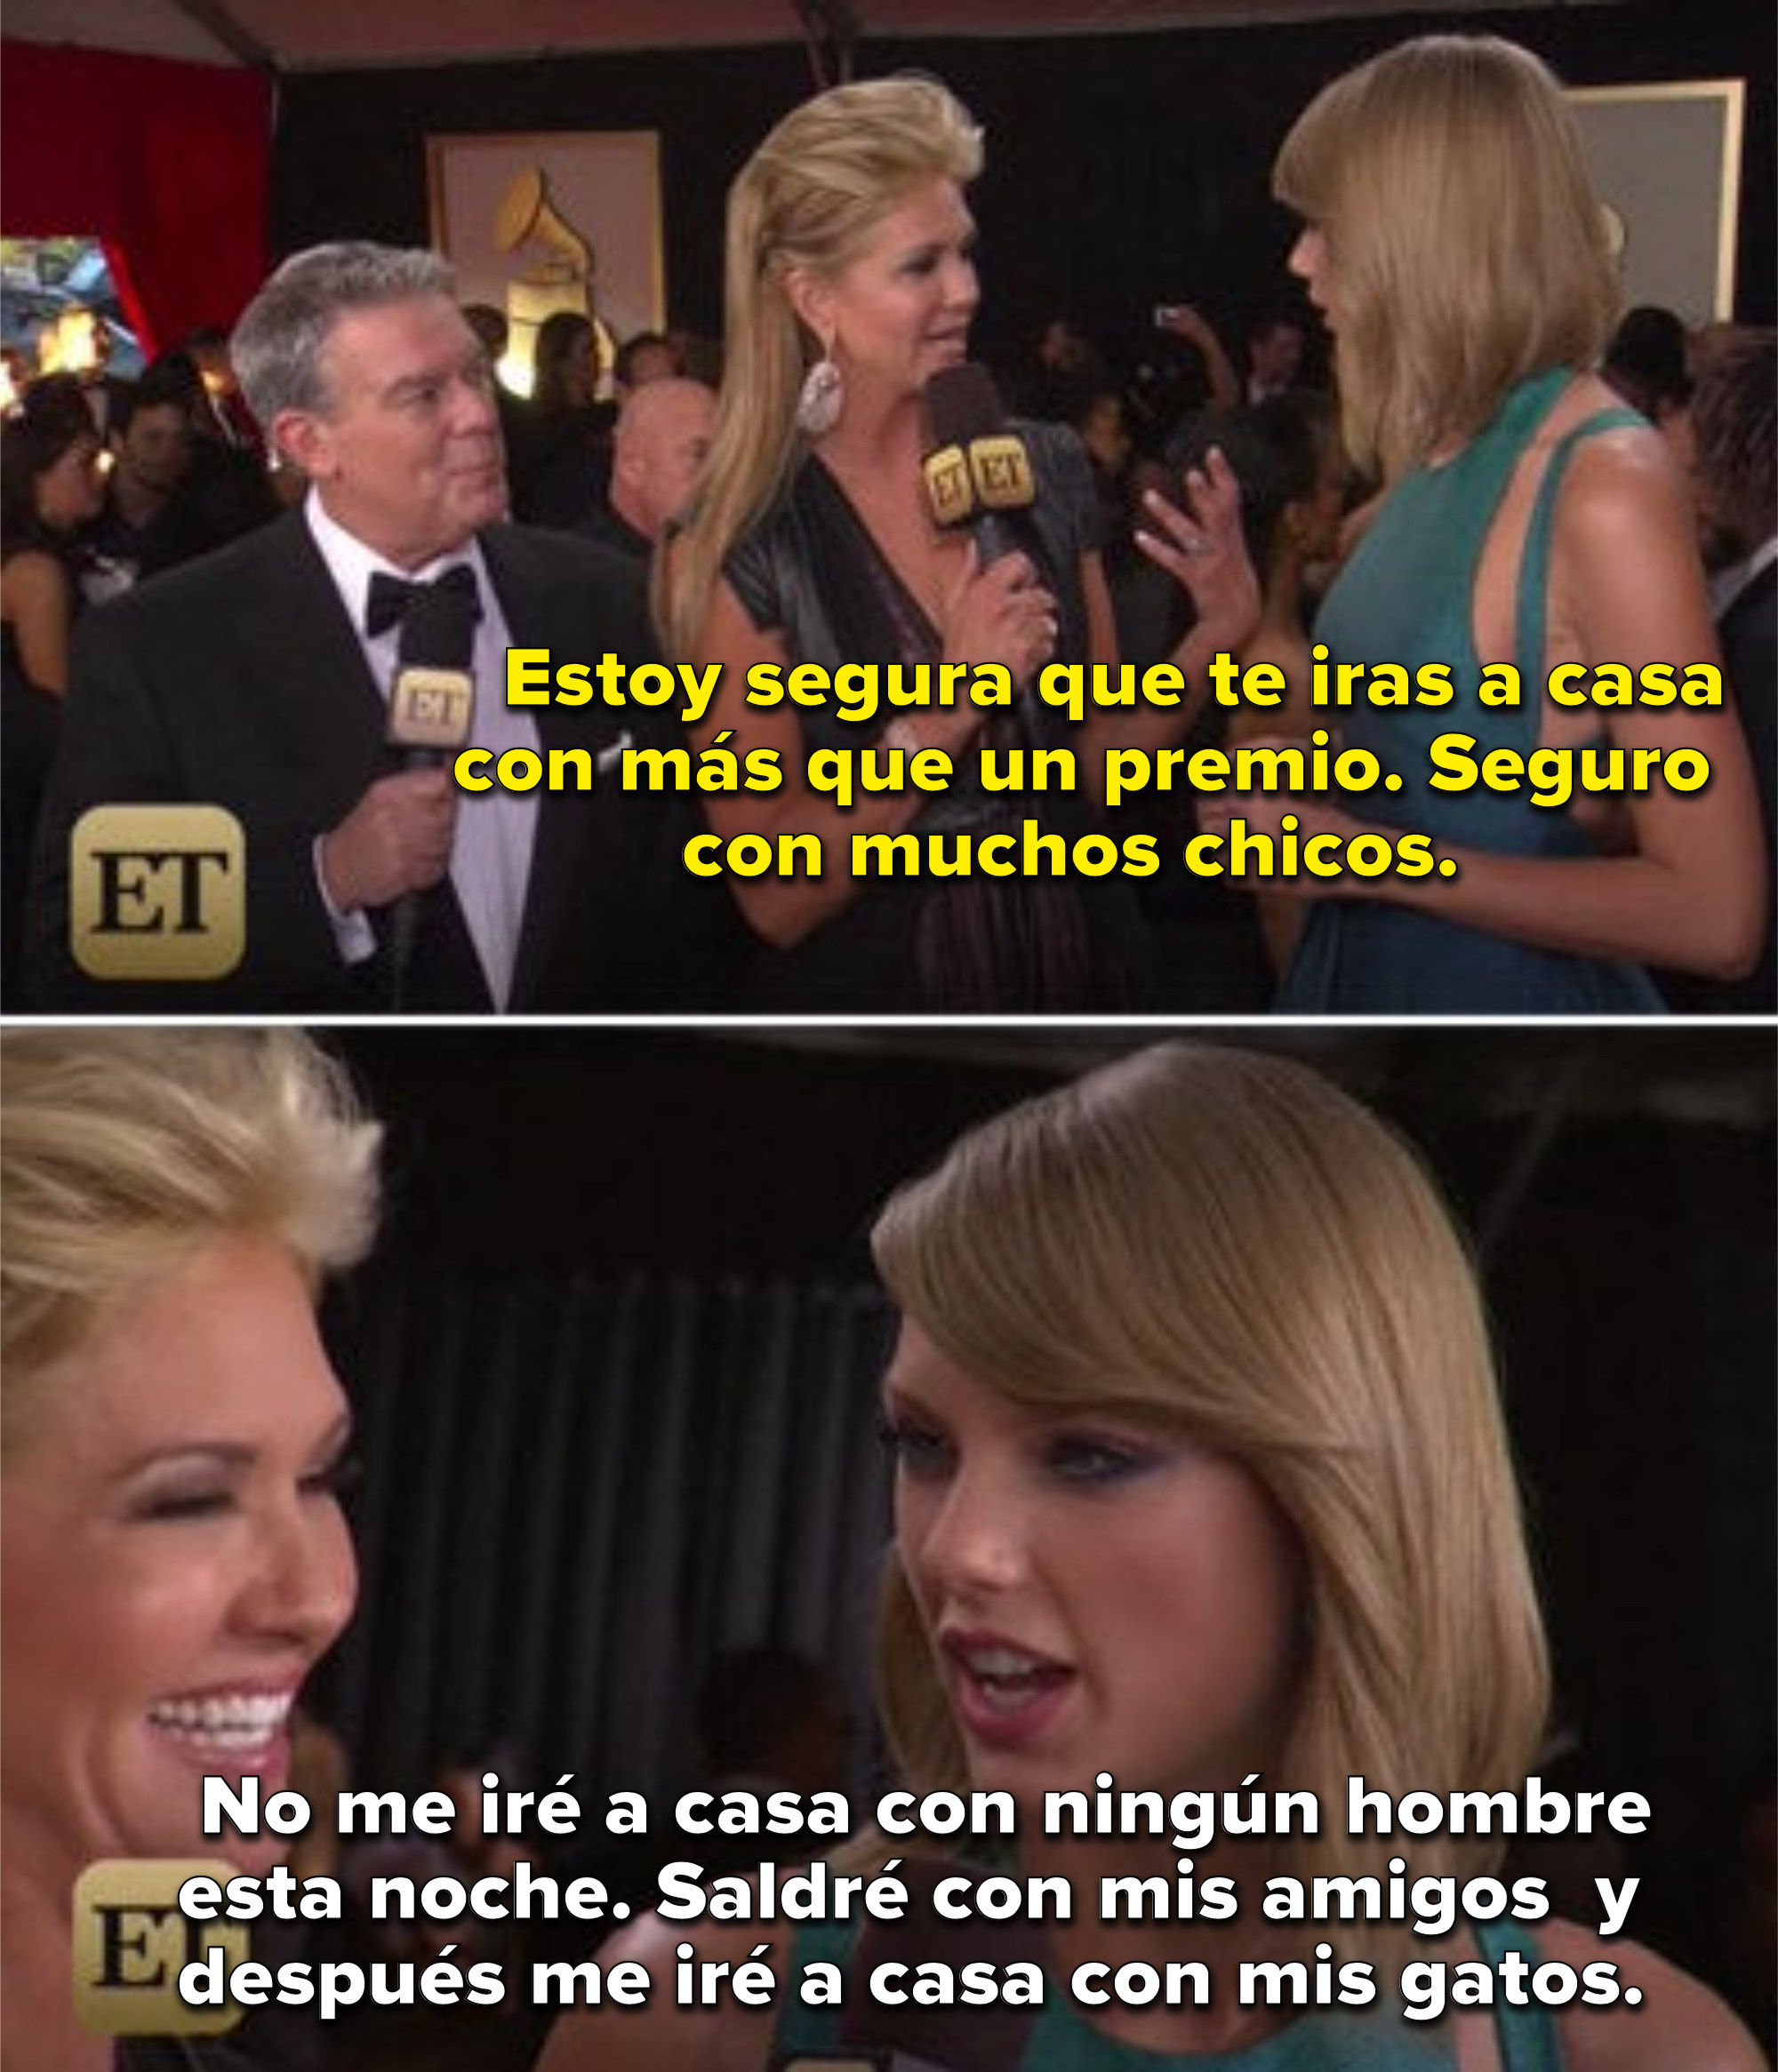 An interviewer telling Taylor she will leave with a lot of men tonight